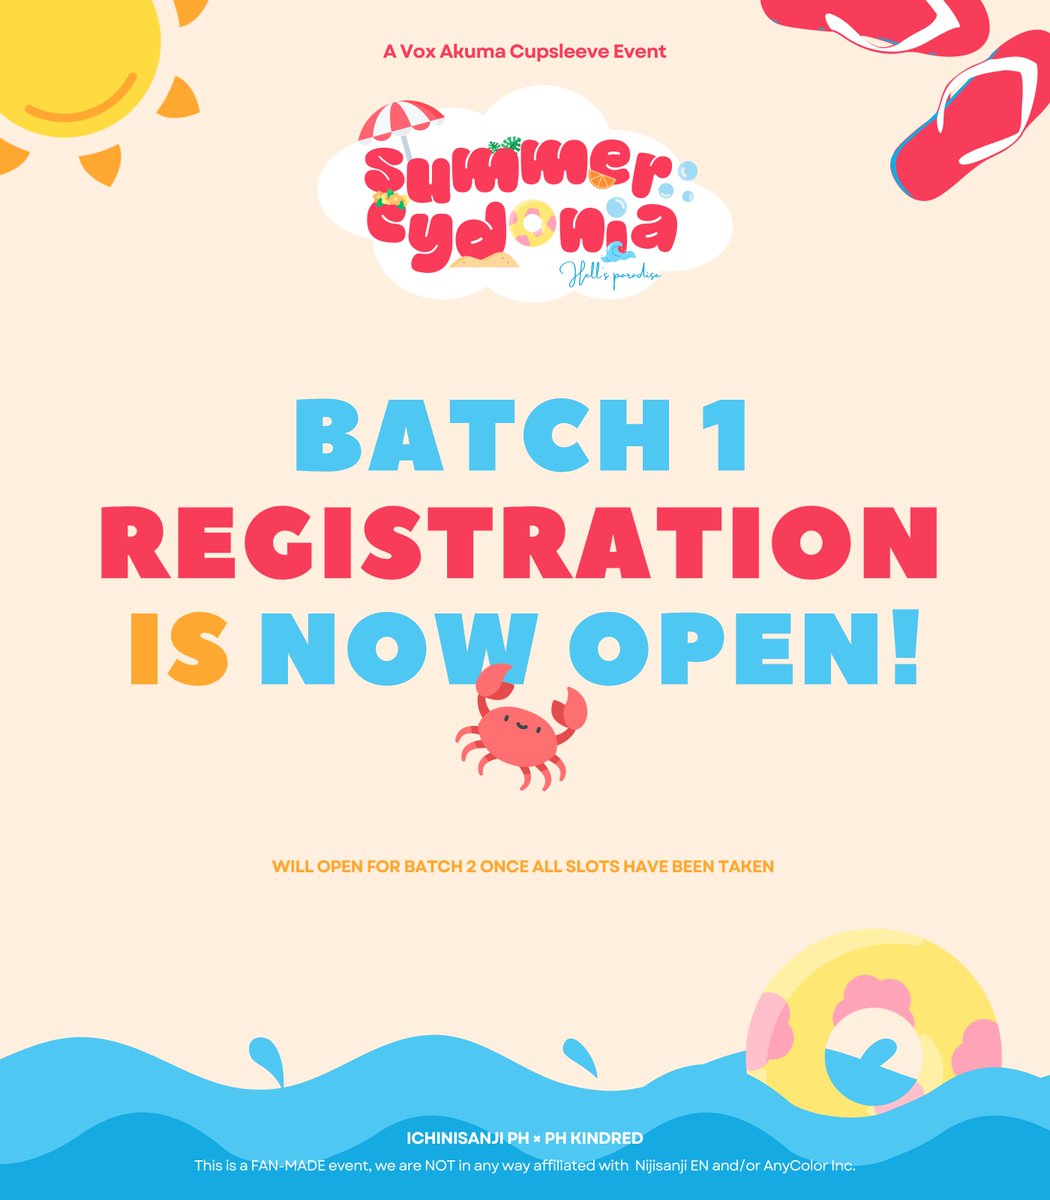 ✨REGISTRATION is NOW OPEN! ✨ Sign up and vibe with us in Summer Cydonia! Fill out the form below & once we've reached the capacity of batch 1, we will be opening batch 2. 😎 🔗: forms.gle/e3zds9XXDhjriz… #SummerCydoniaCSE #SummerCydoniaHP